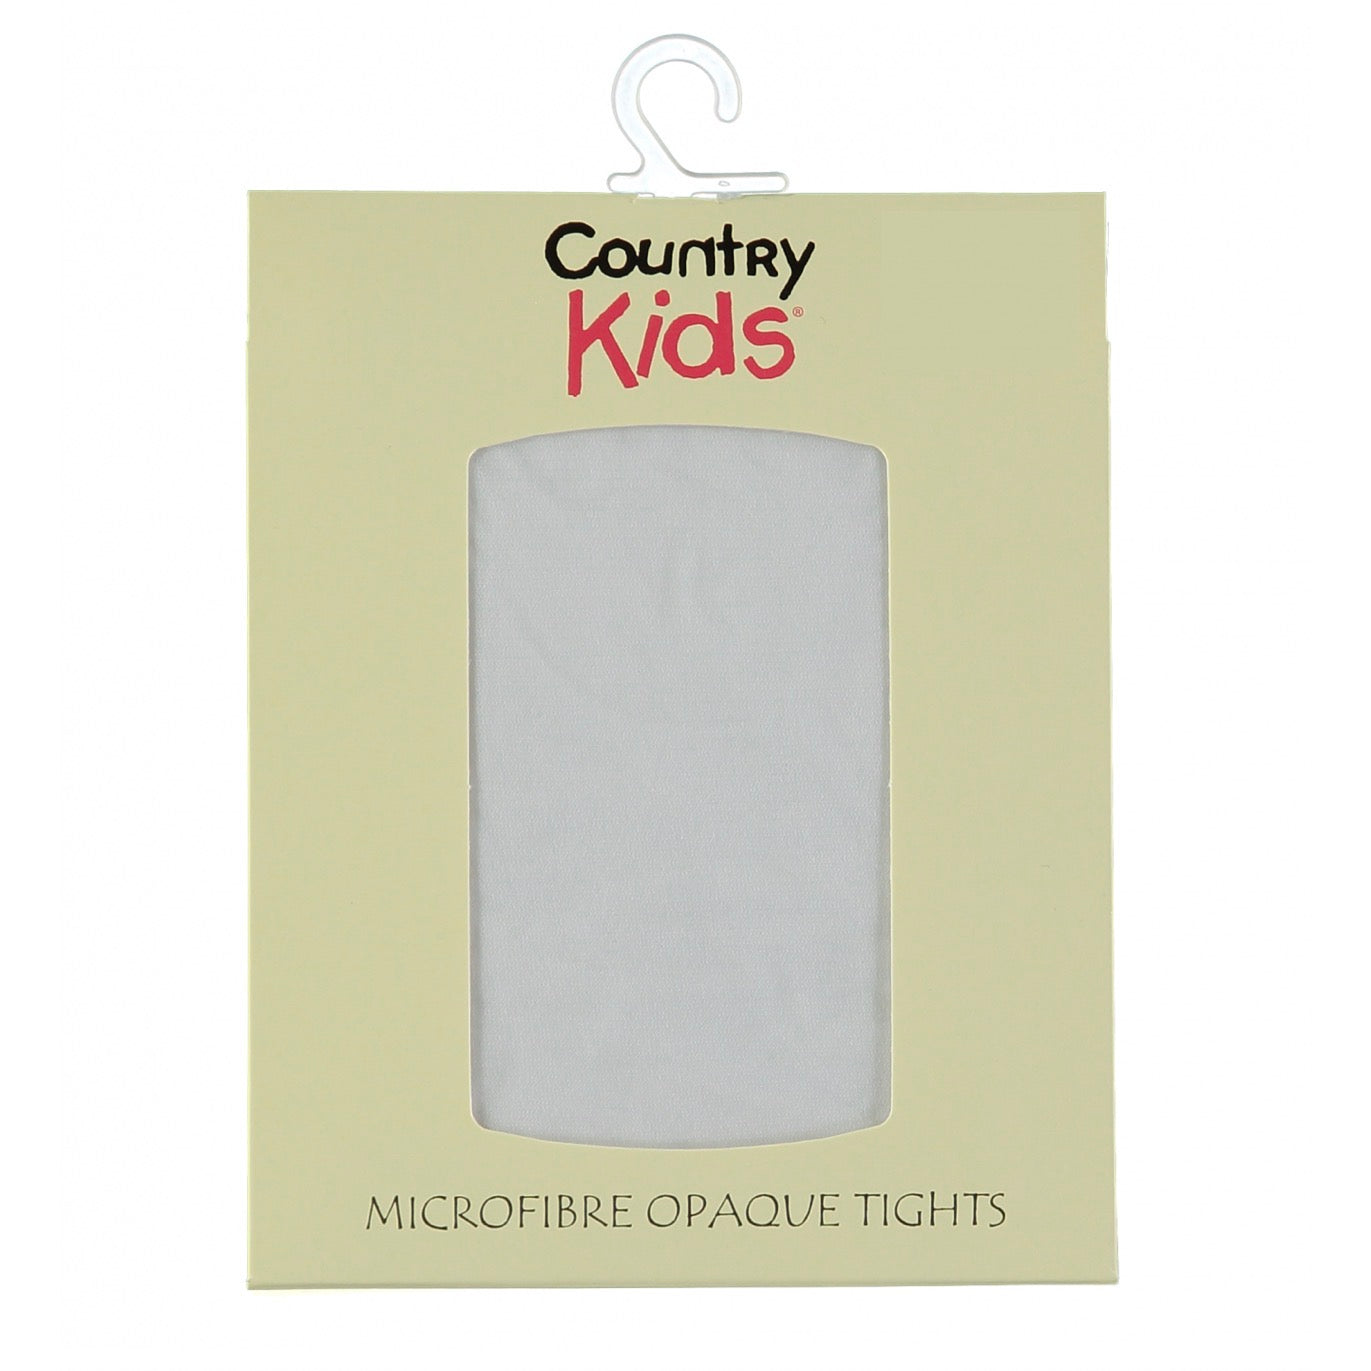 Country Kids Opaque Tights Ivory Clothing 1-3YRS / Cream,3-5YRS / Cream,6-8YRS / Cream,9-11YRS / Cream,12-15YRS / Cream